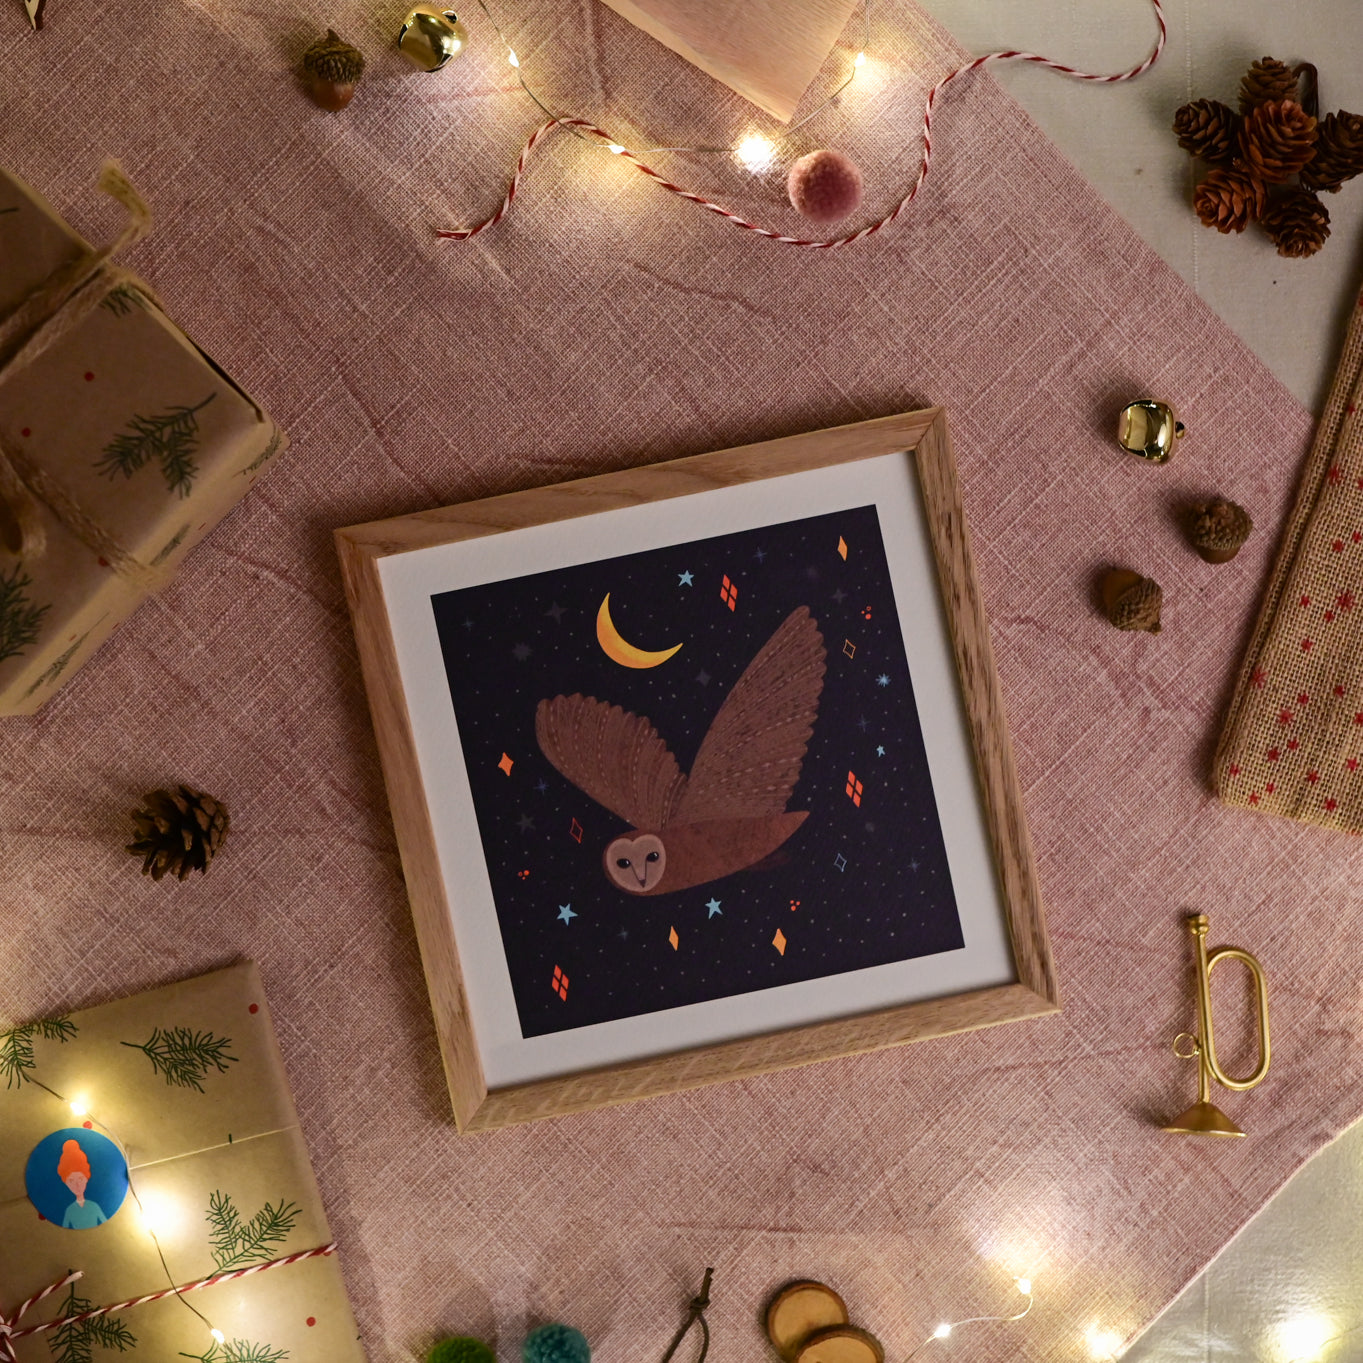 3 Reasons why you should gift Wall Art this Christmas 🎄